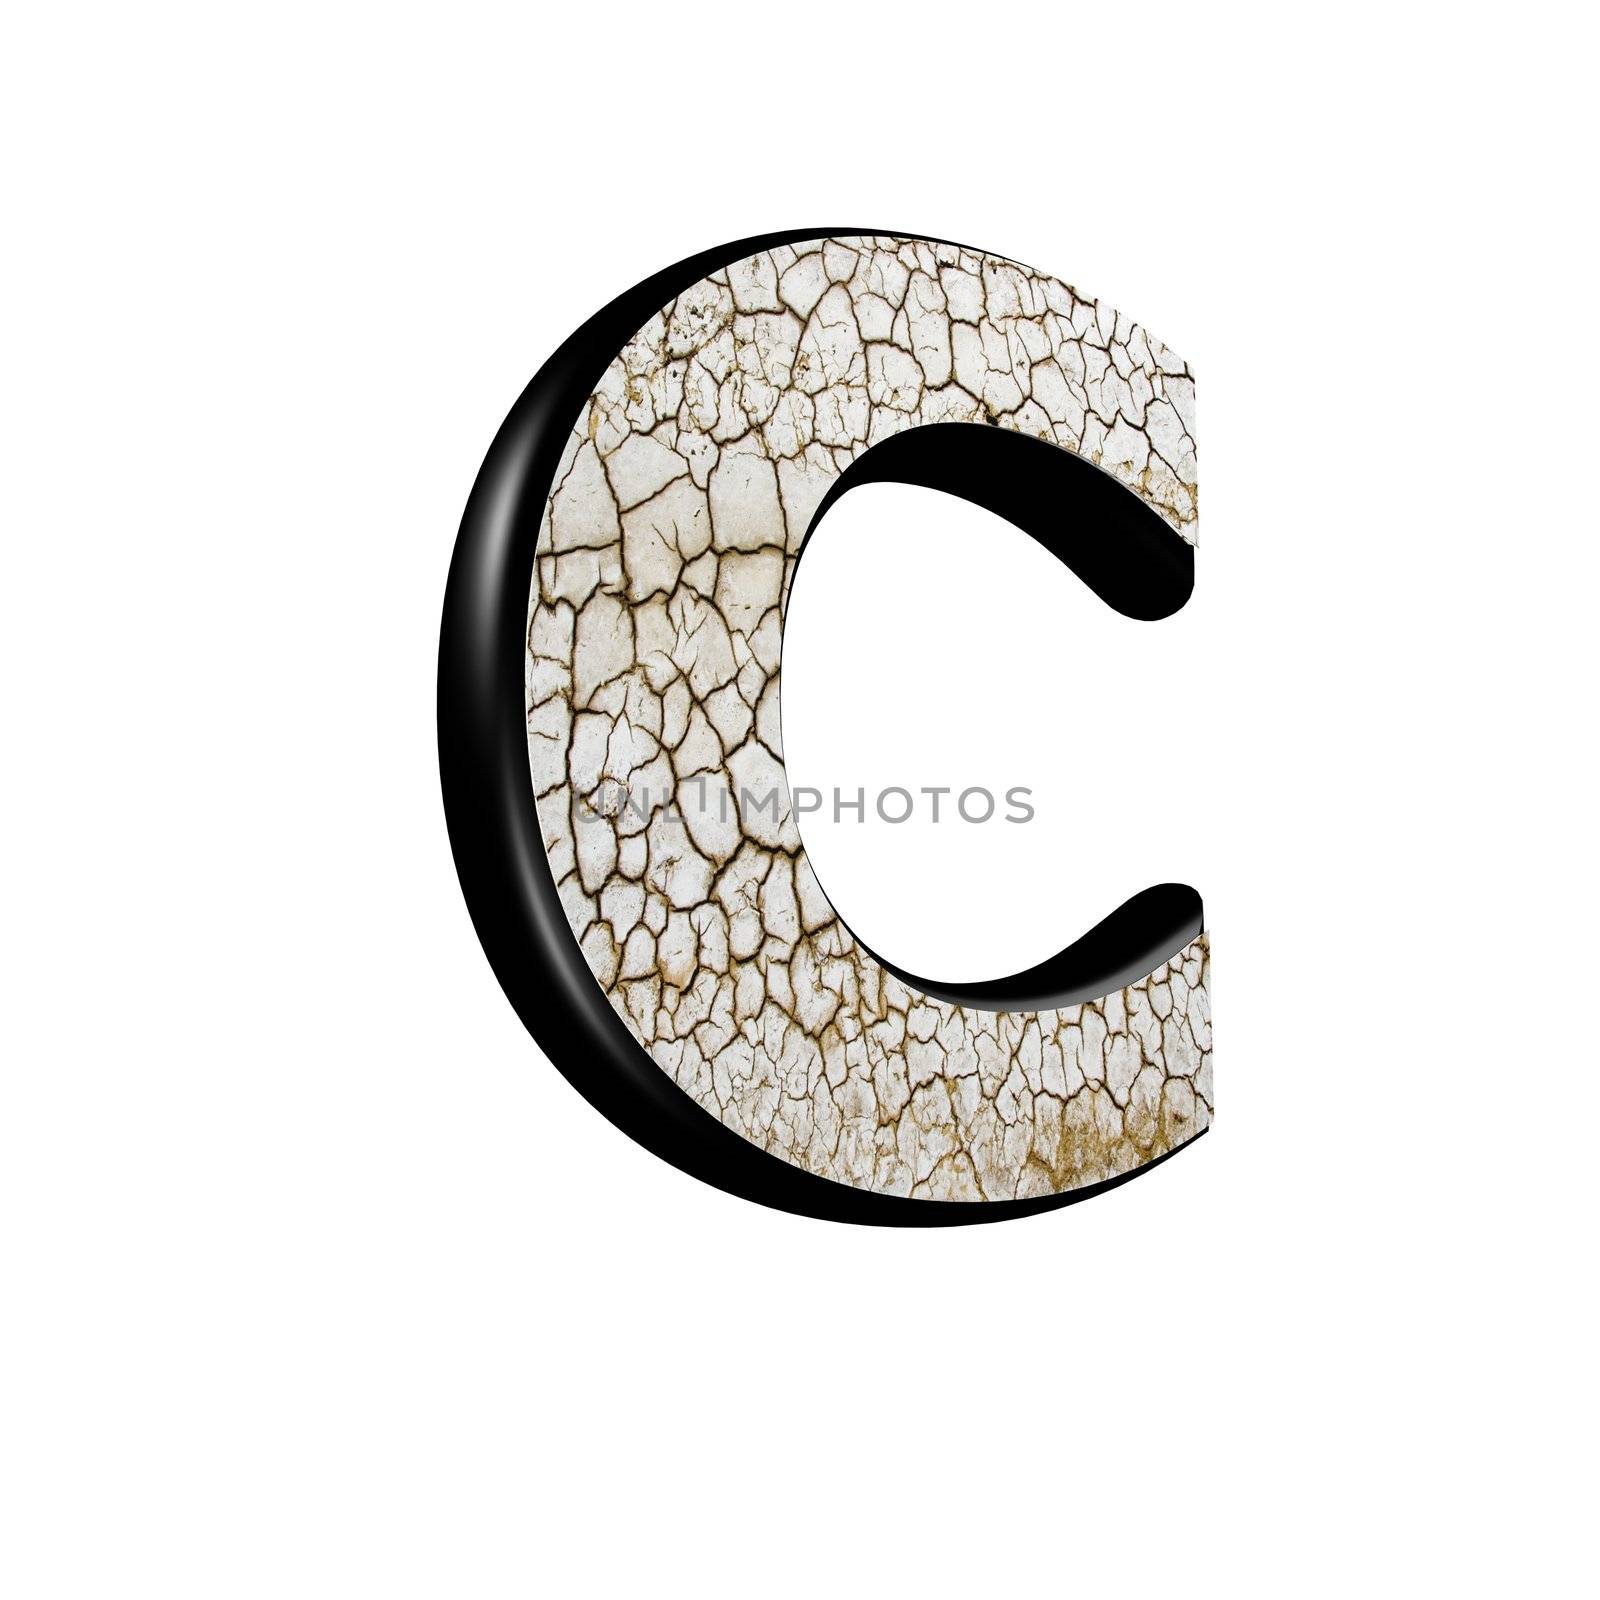 abstract 3d letter with dry ground texture - C by chrisroll